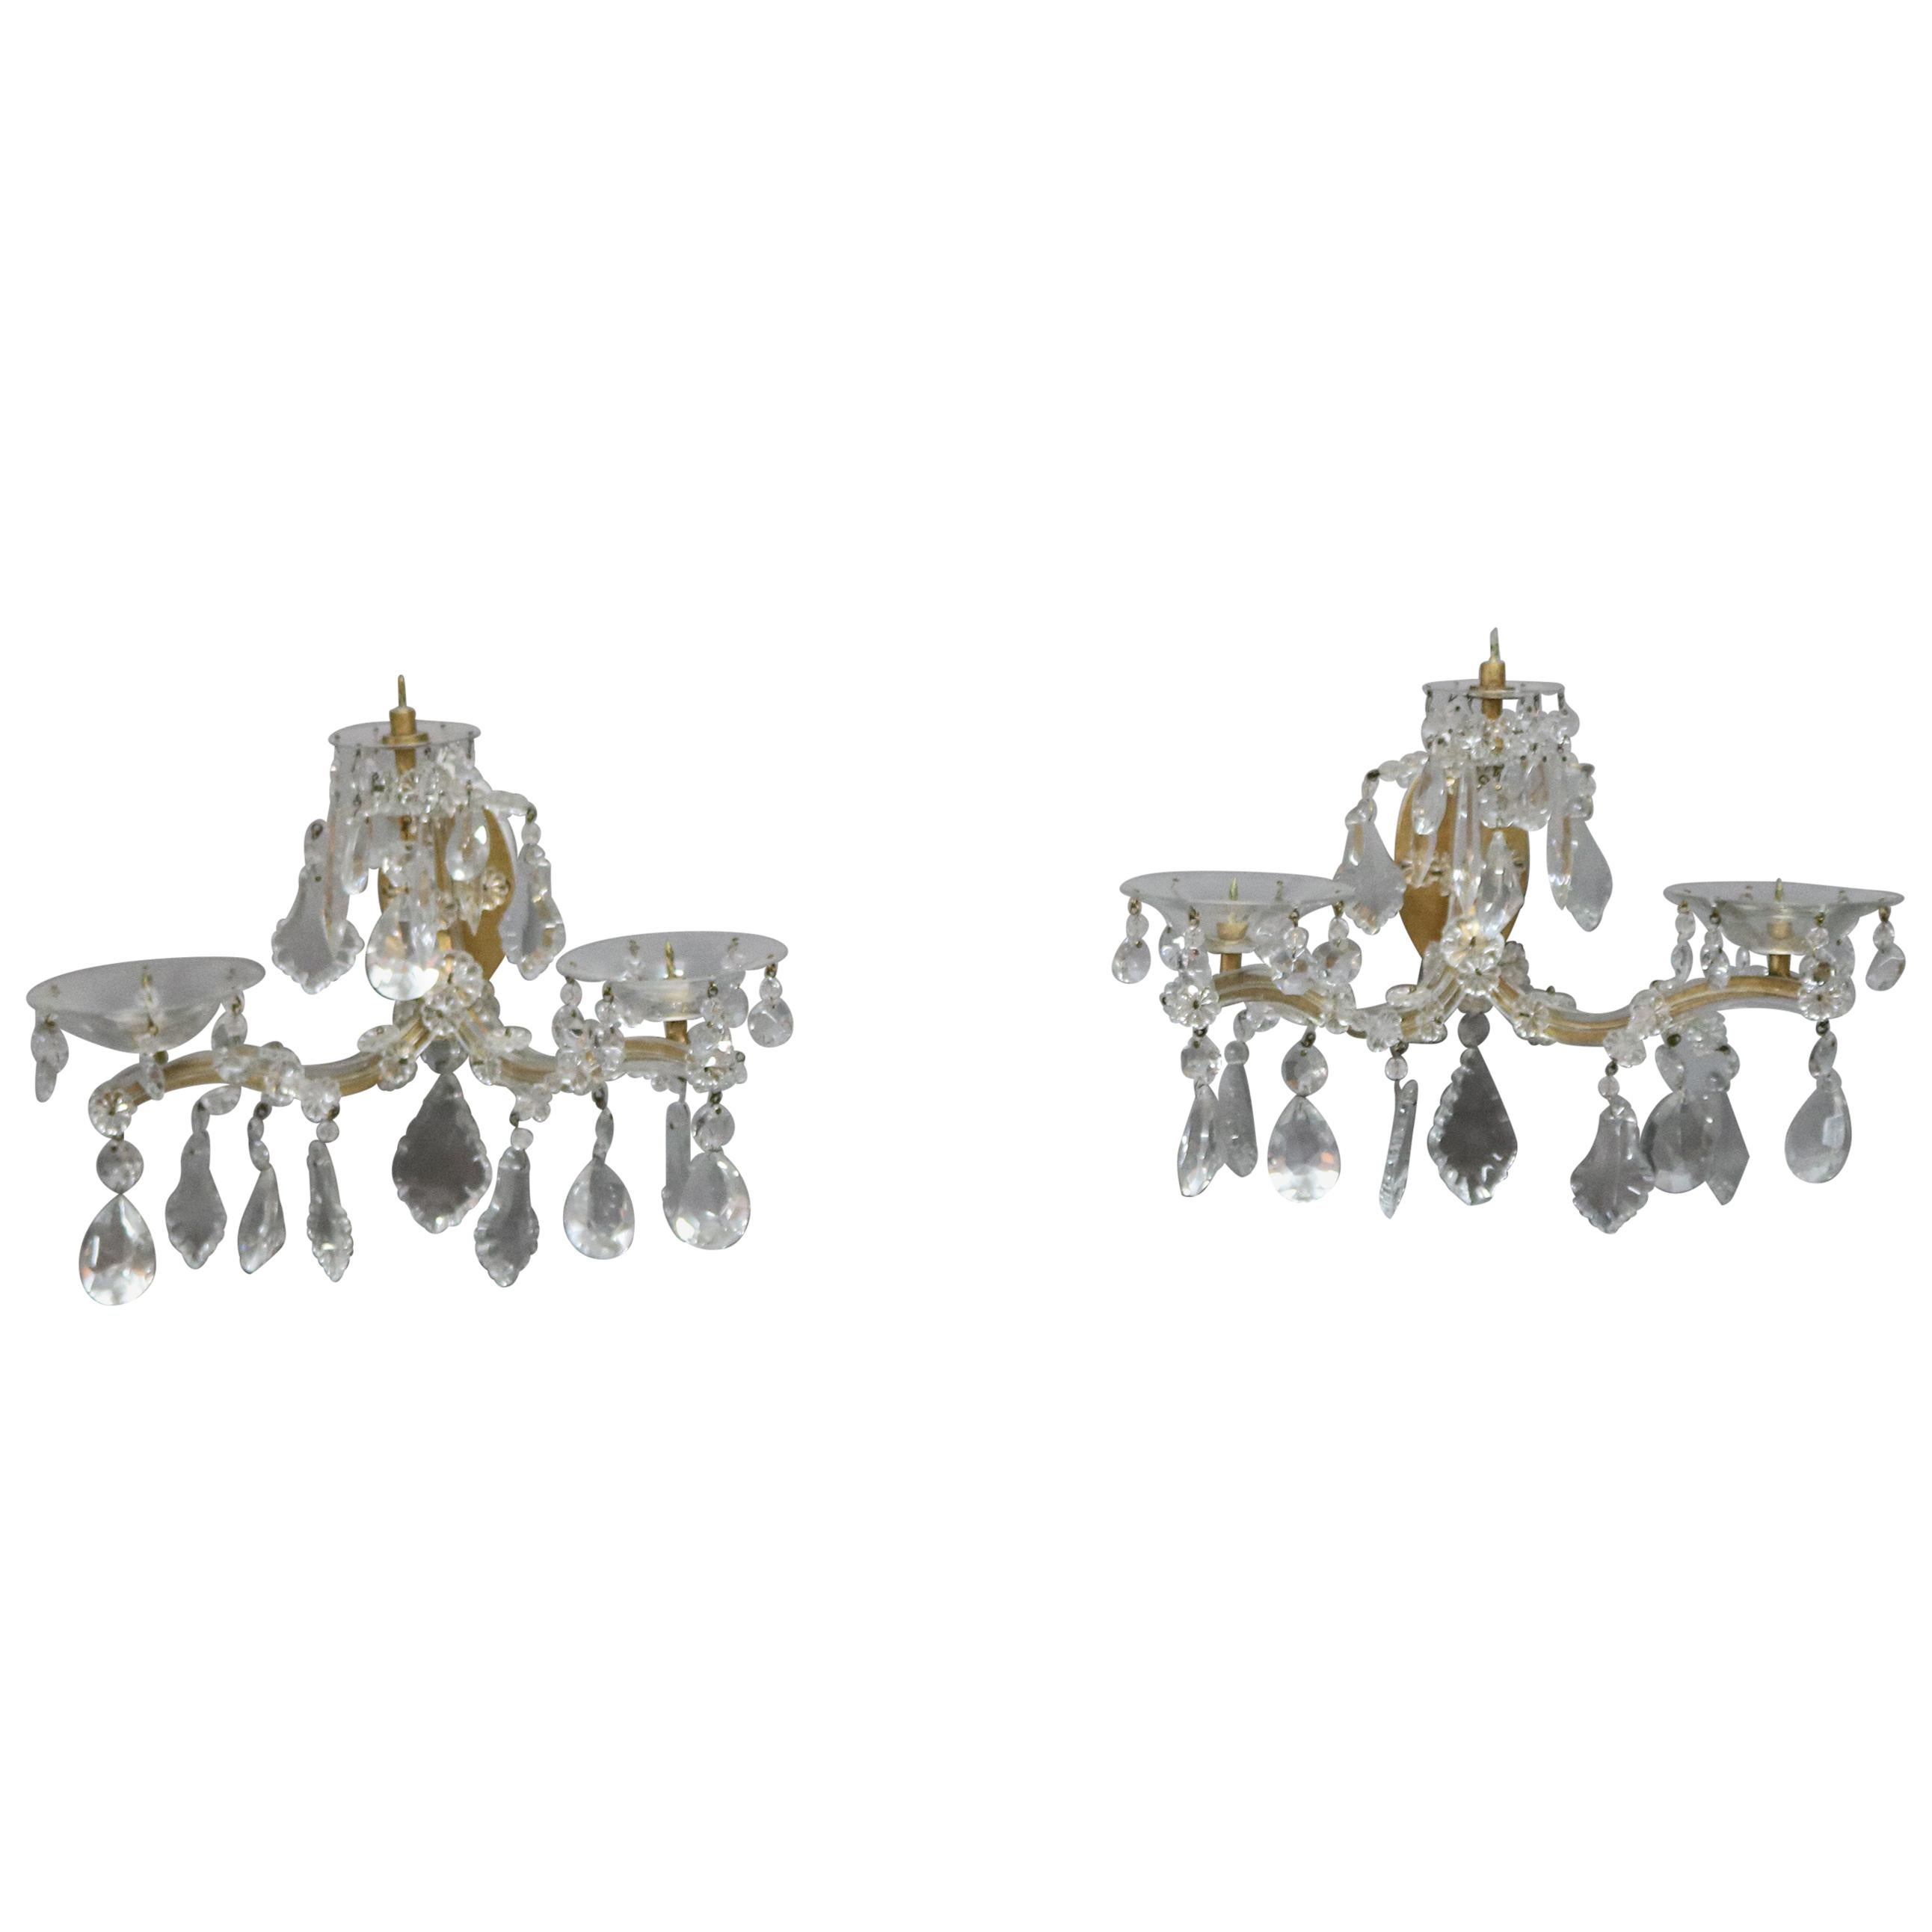 Pair of French Style Brass & Crystal Candle Wall Sconces, circa 1940